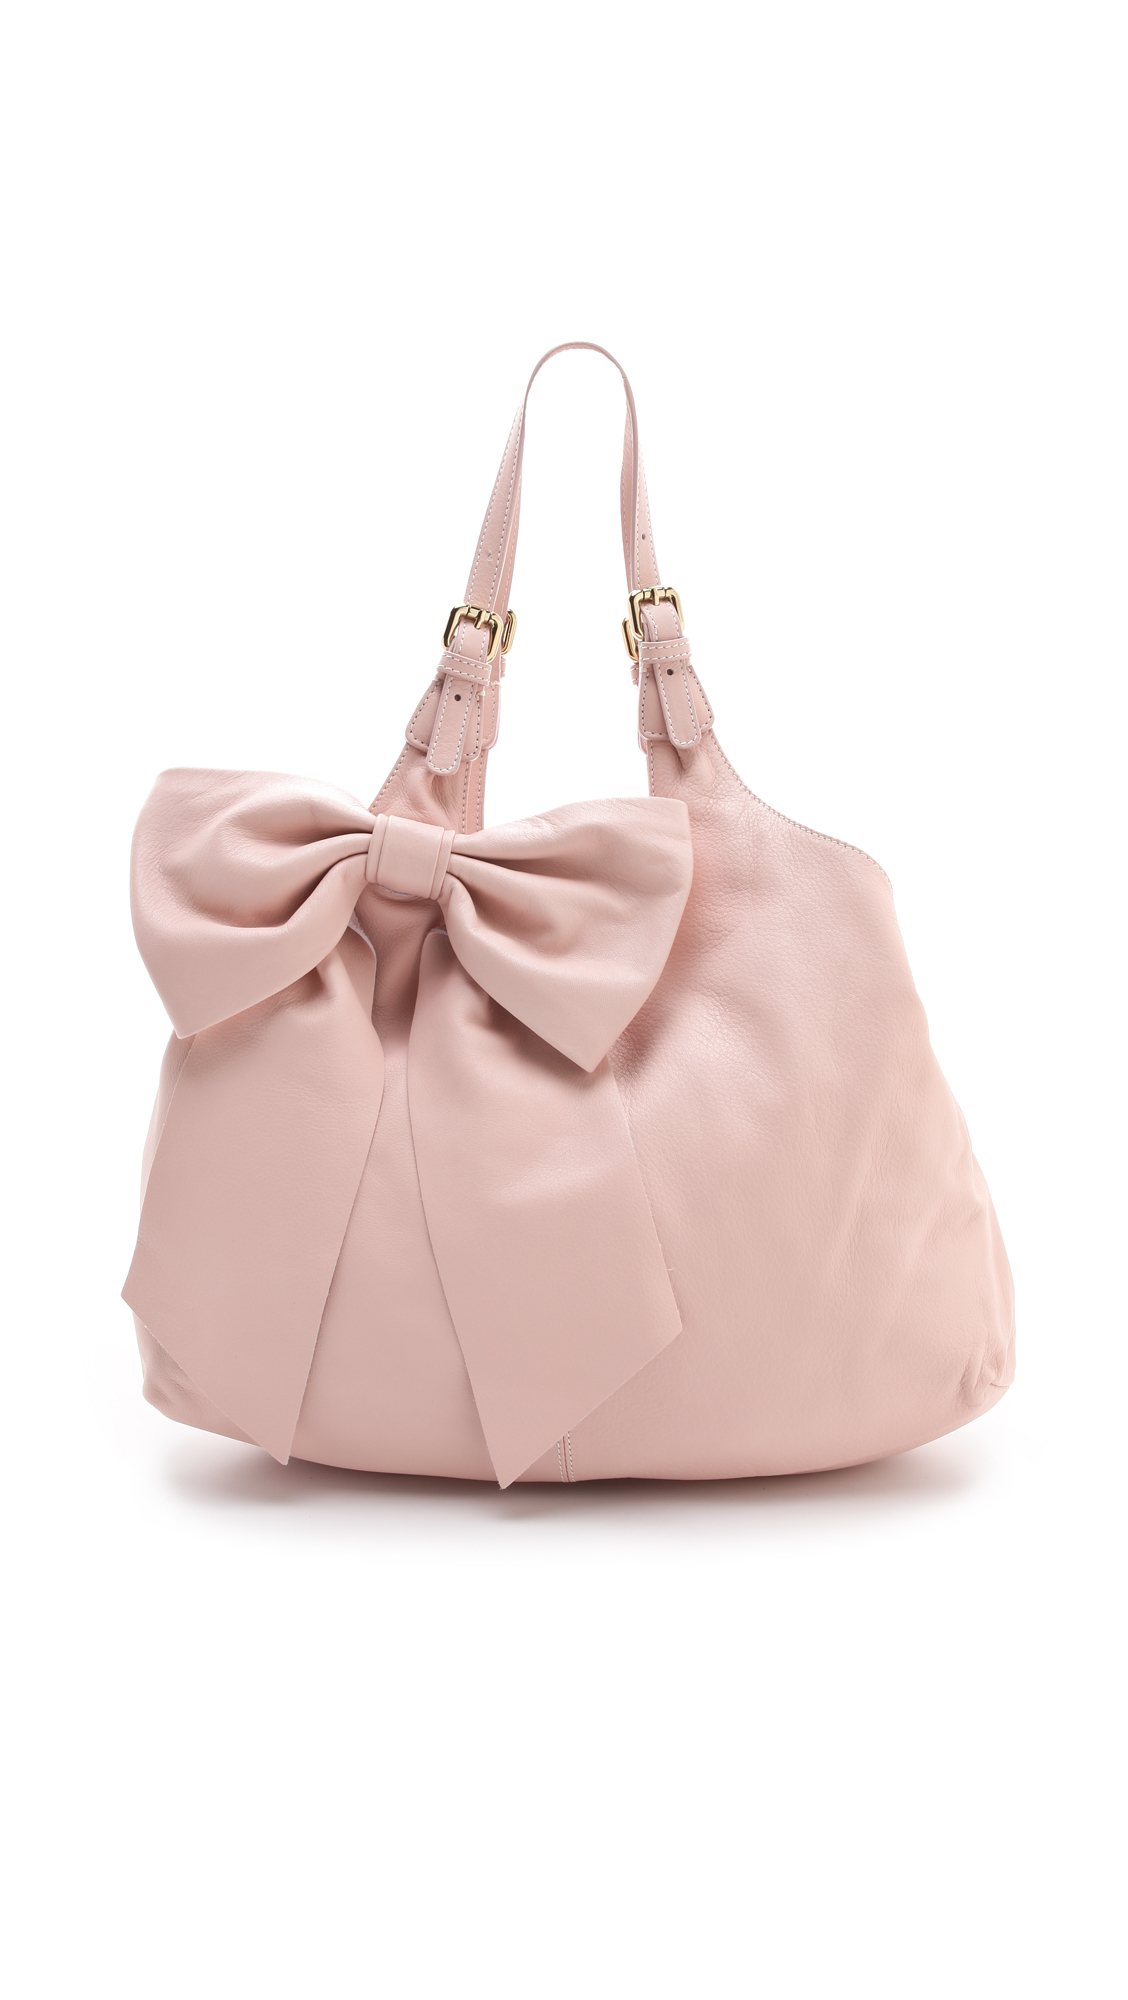 RED Valentino Bow Shoulder Bag in Pink Lyst